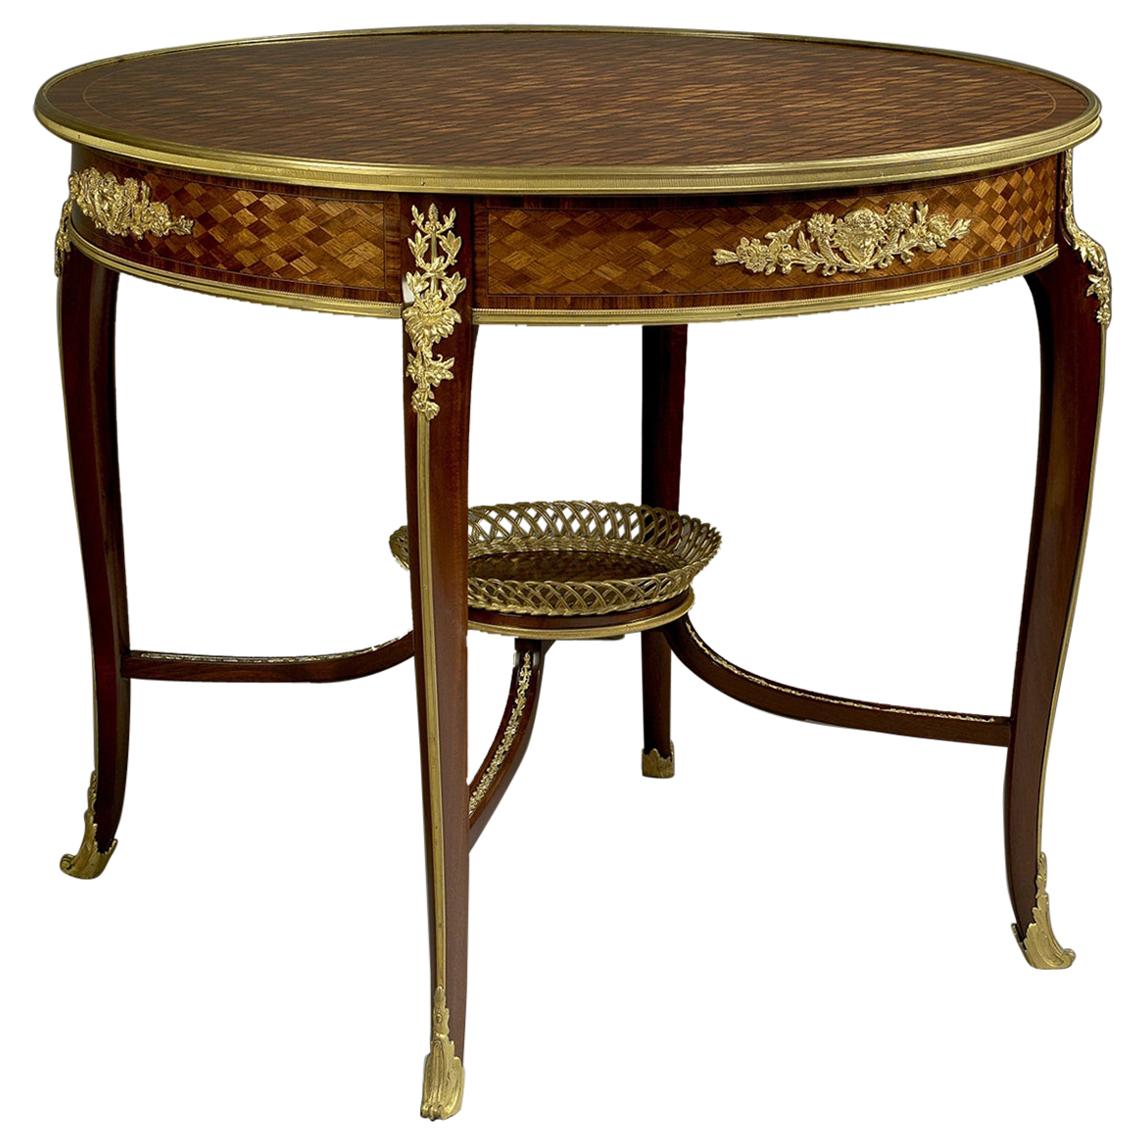 Parquetry Inlaid Centre Table Attributed to François Linke, circa 1900